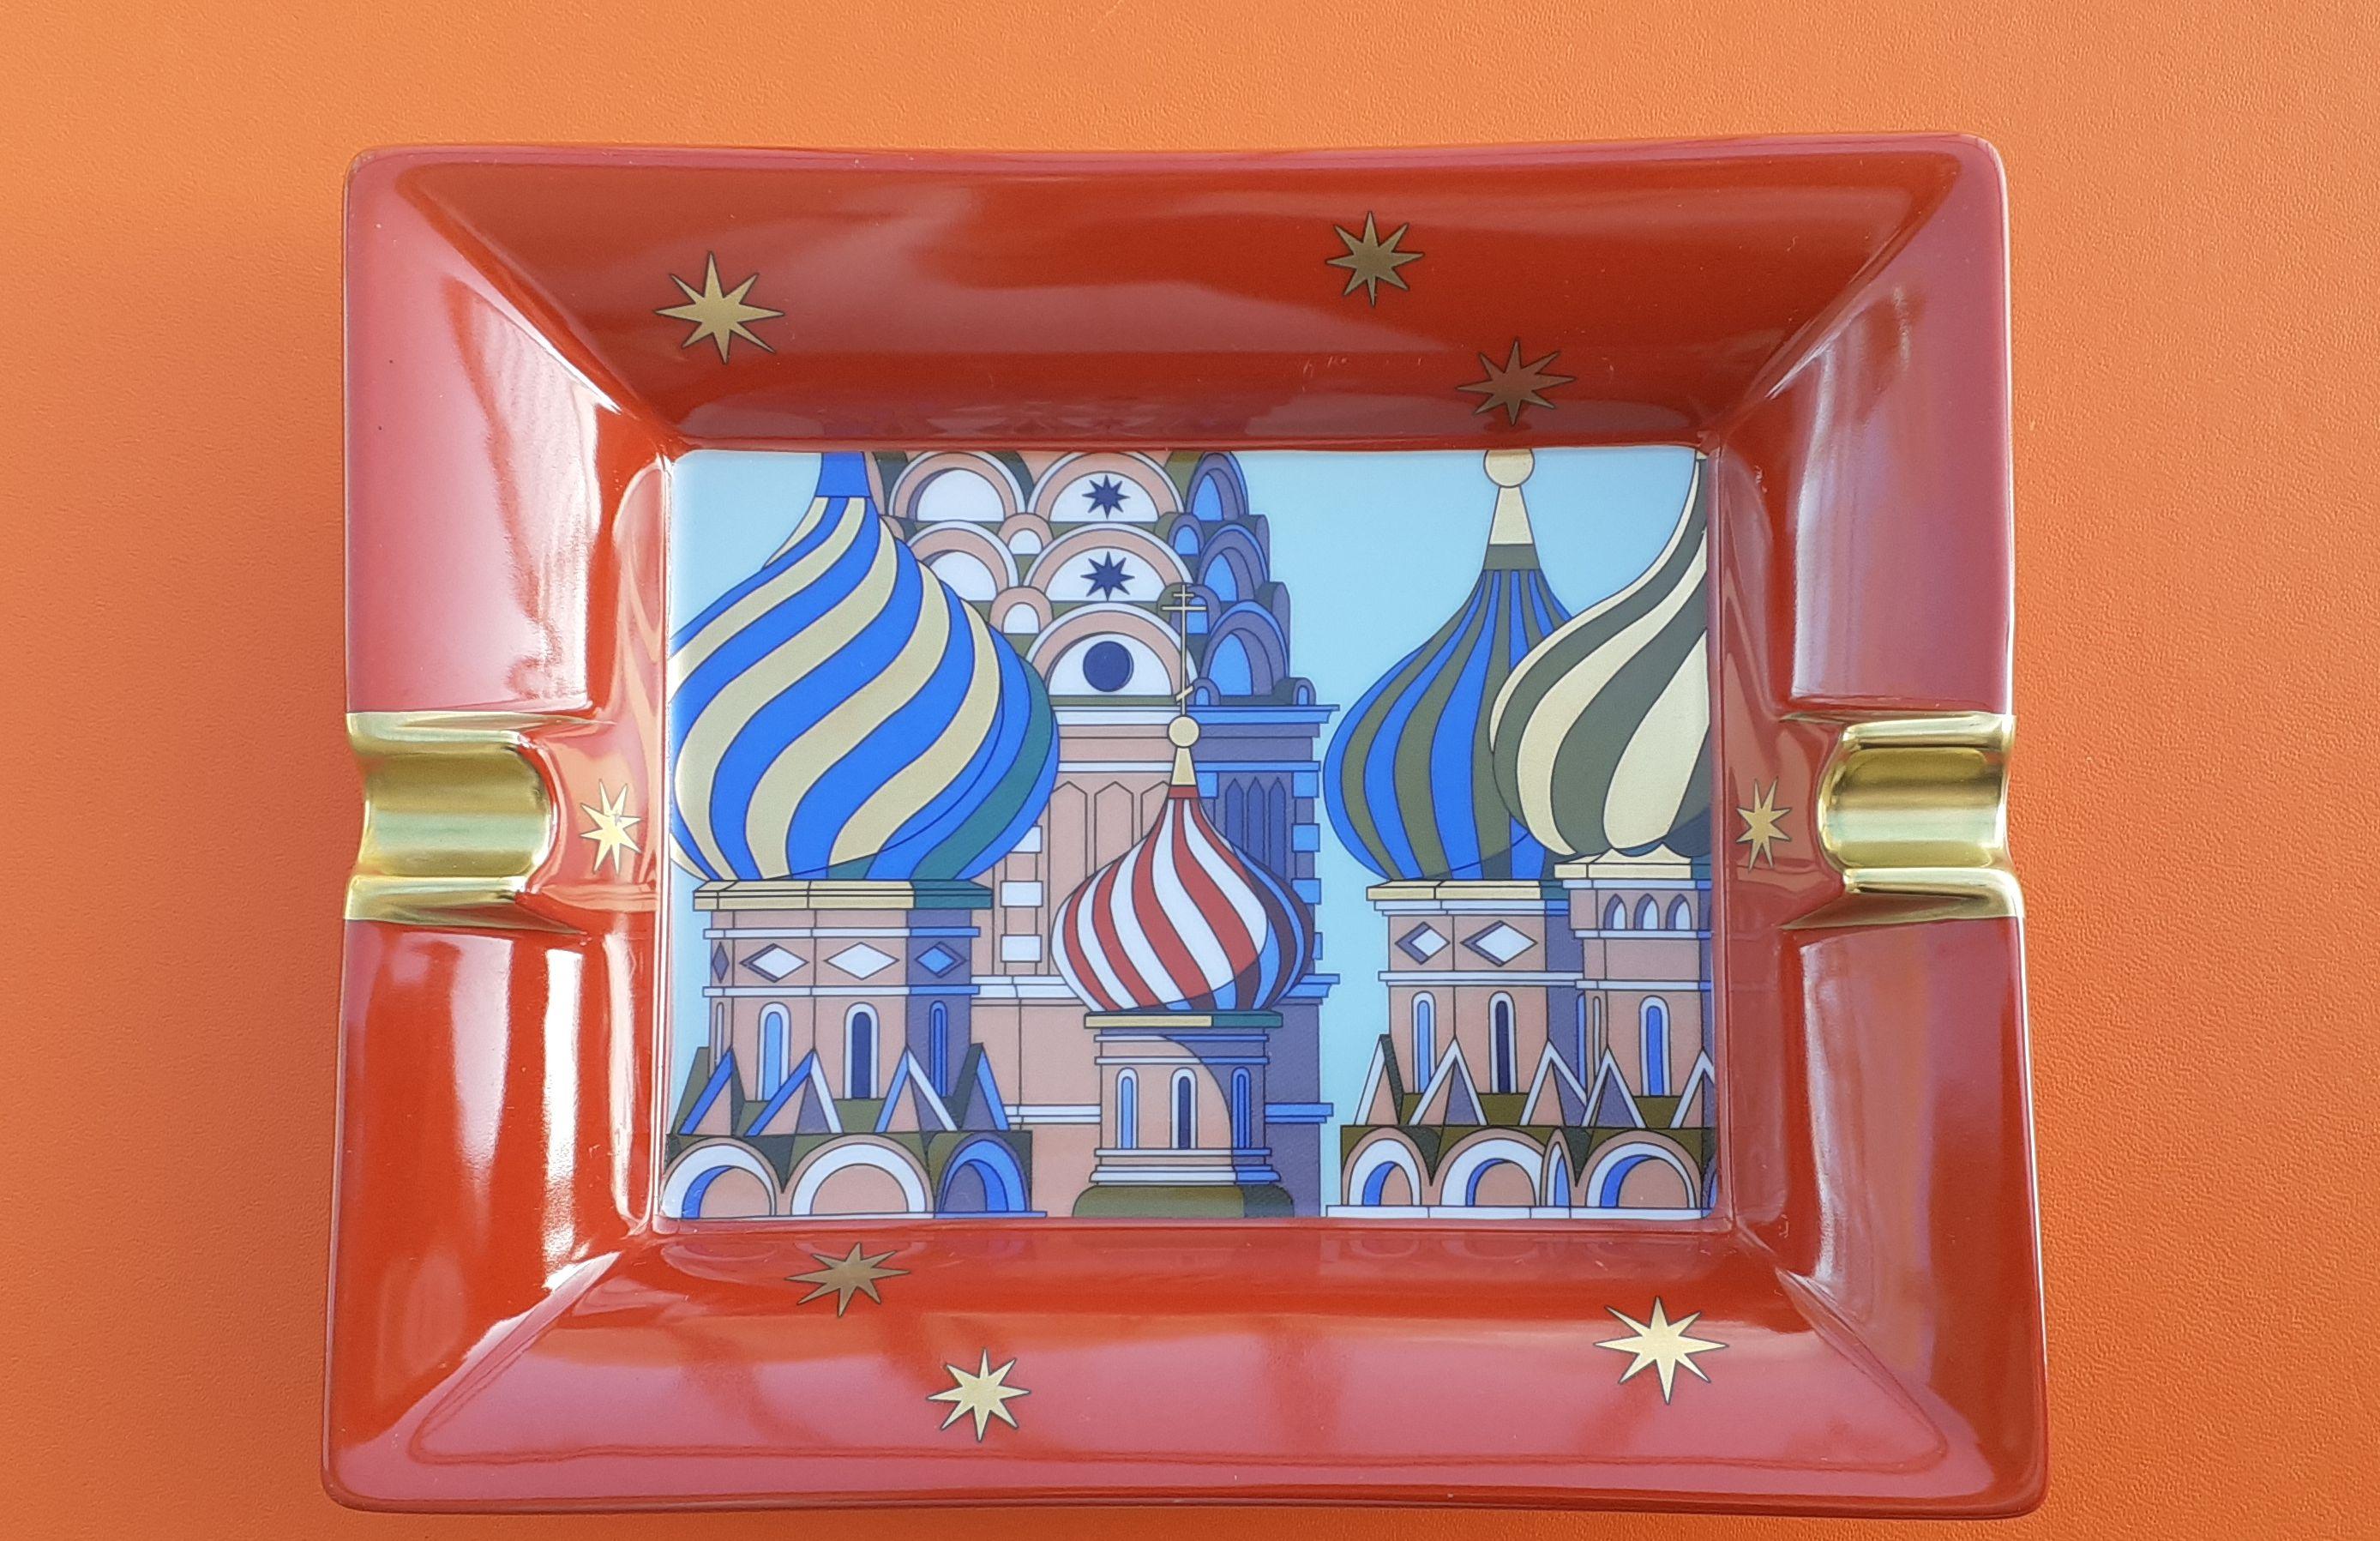 Gorgeous and Rare Authentic Hermès Ashtray

Print: Cathedral of Saint Basil the Blessed in Moscow

Pattern: russian roofs

From the 